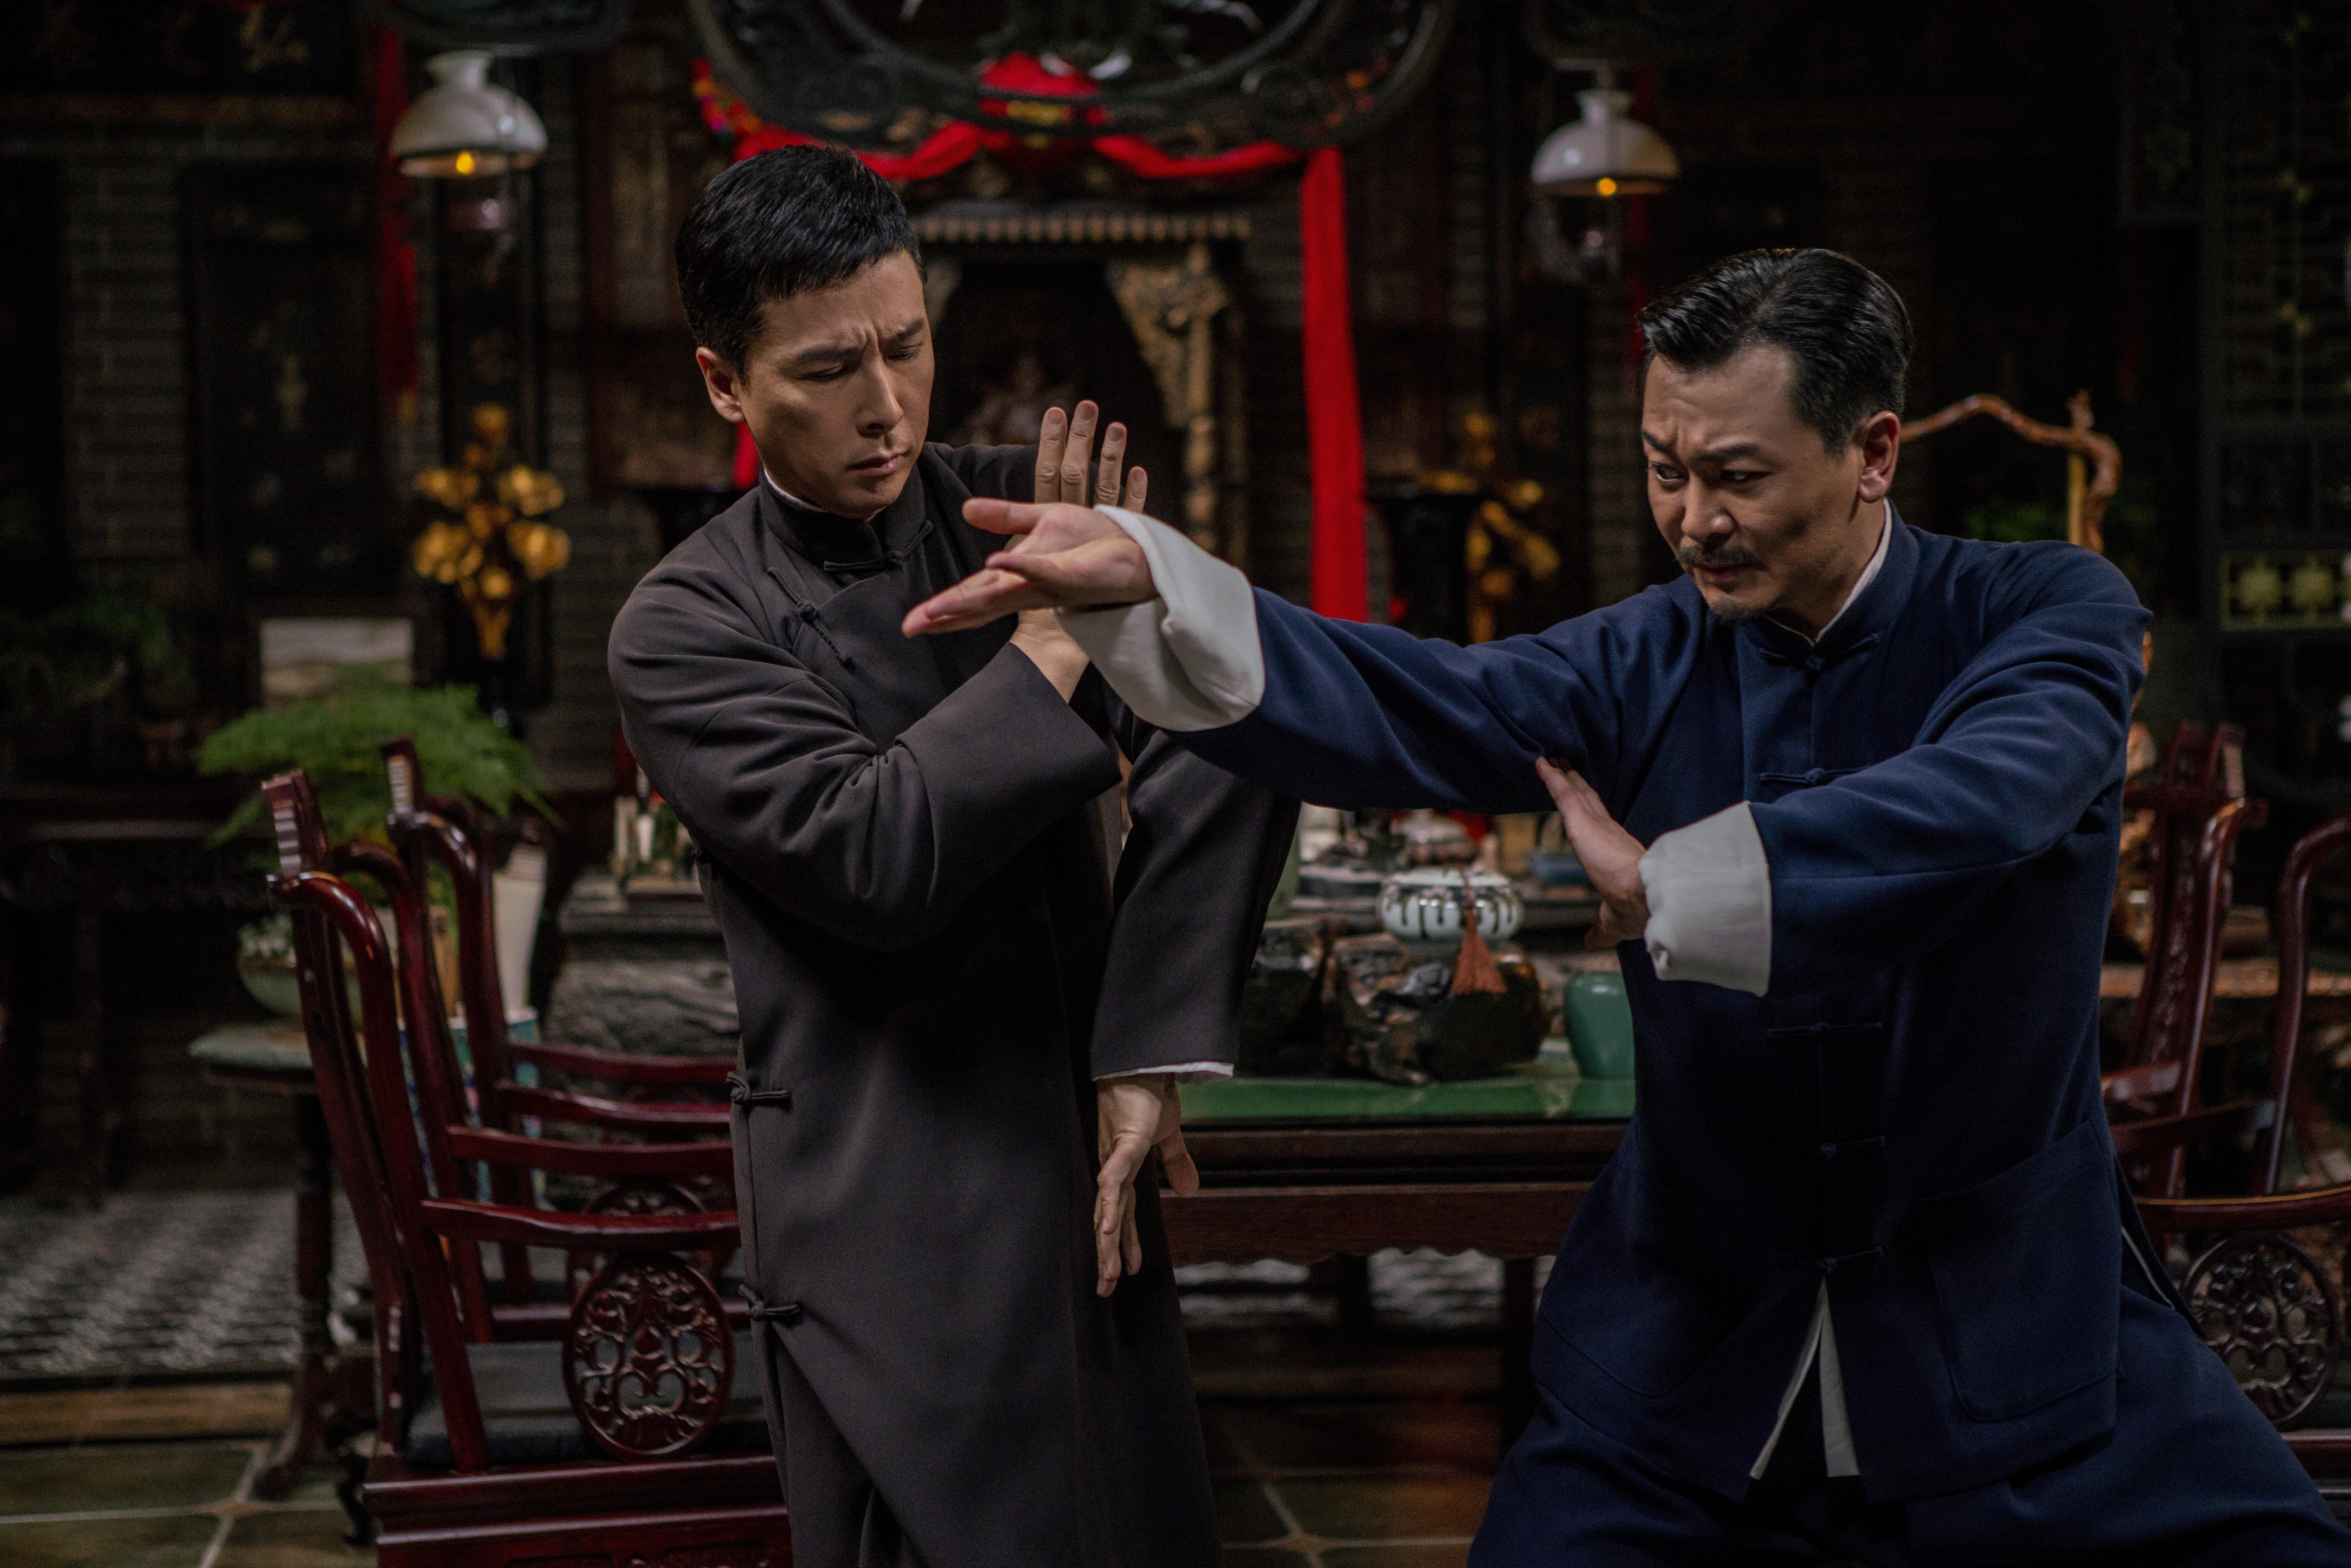 Donnie Yen (left) and Wu Yue in a still from Ip Man 4: The Finale. Photo: Handout